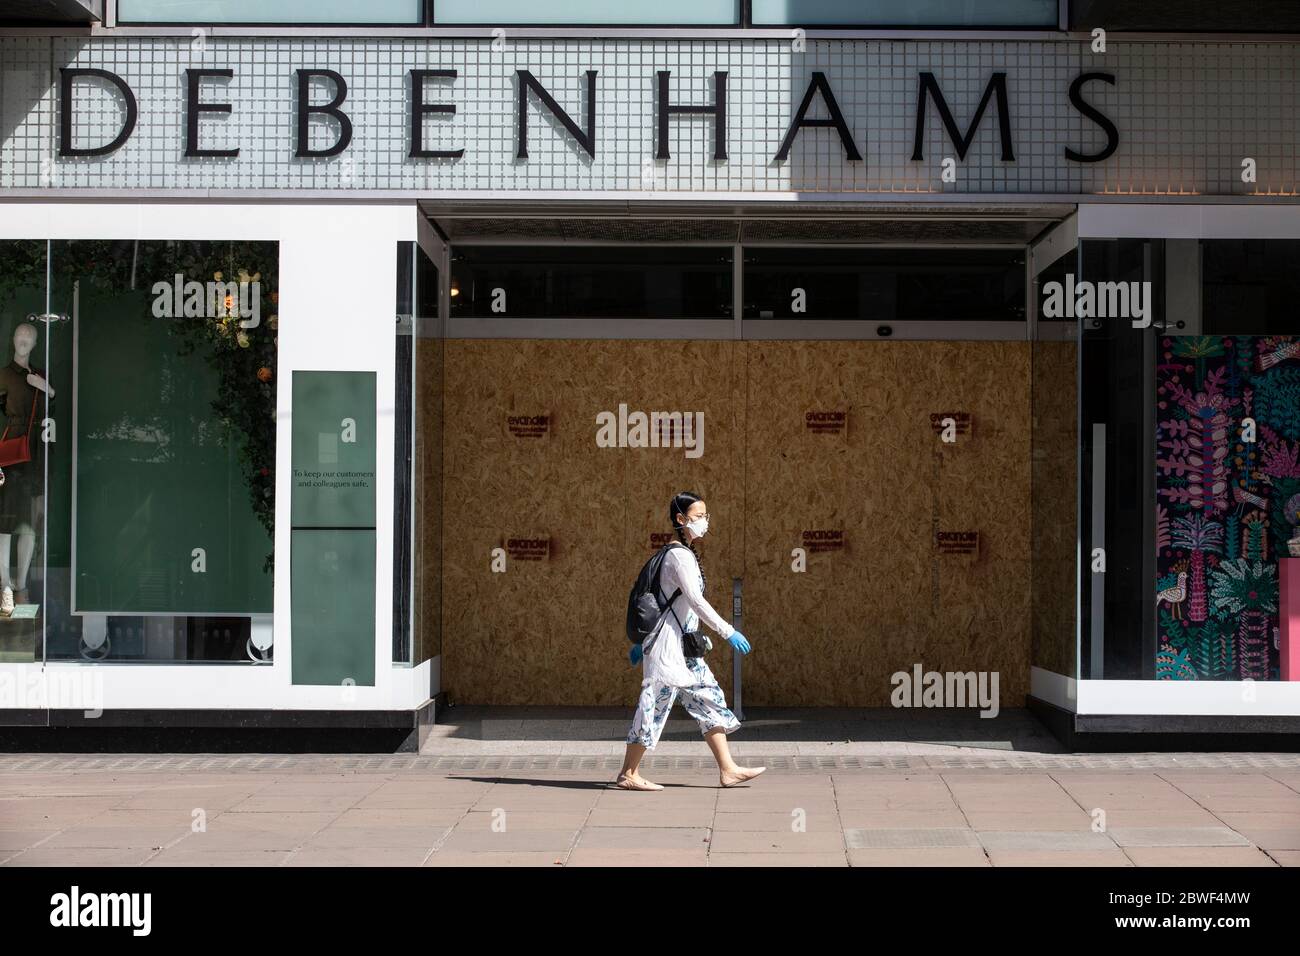 Pedestrians continue to wear facemarks along Oxford Street as businesses prepare to reopen on June 15th after the coronavirus lockdown, London, UK Stock Photo